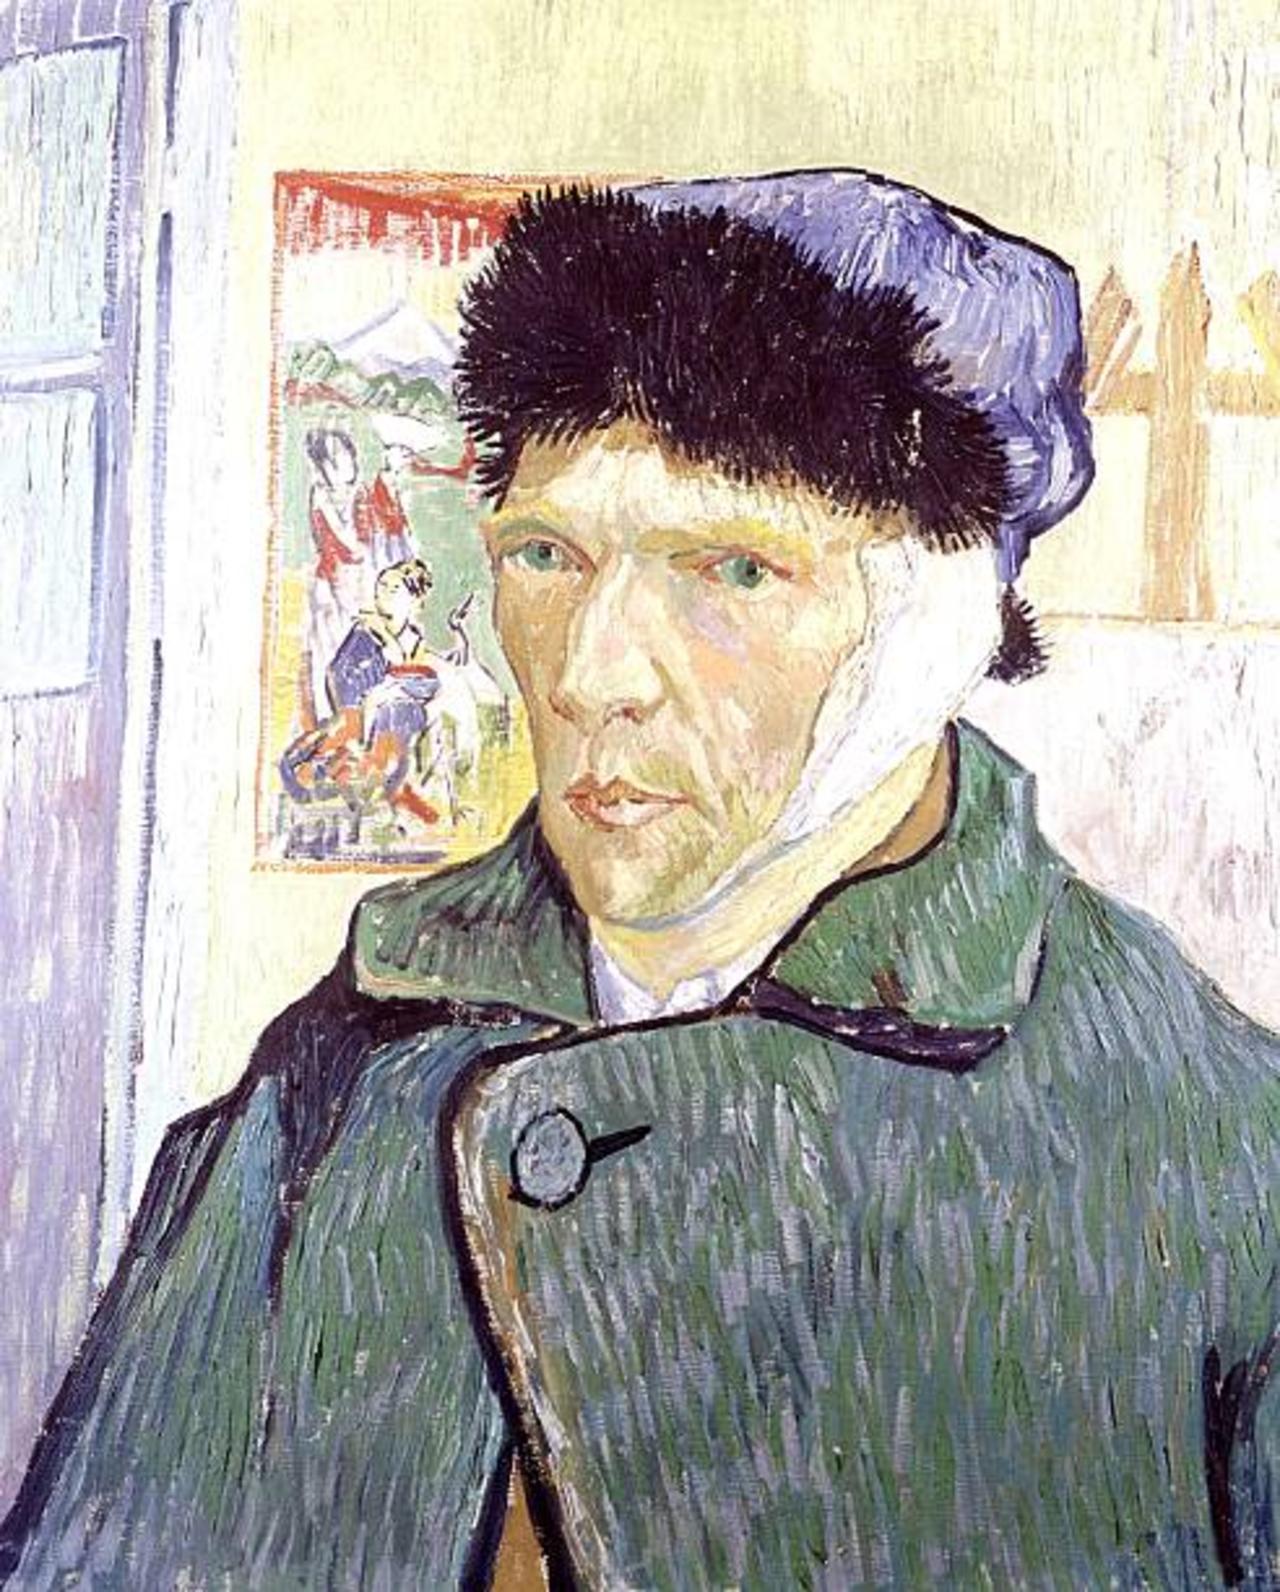 This Day in History: Van Gogh Cuts off His Ear